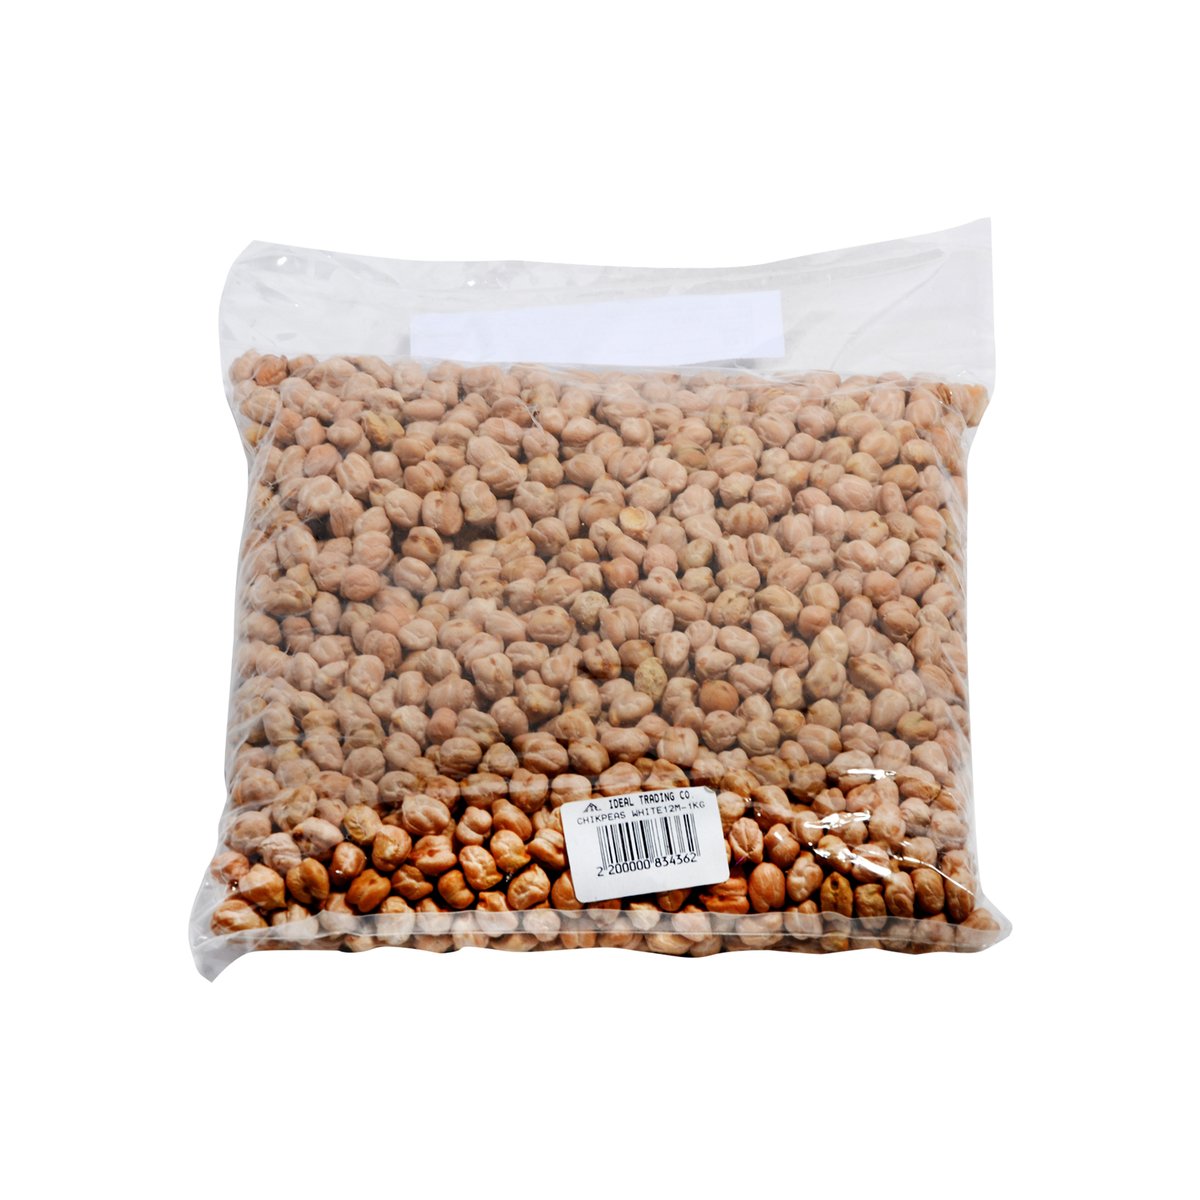 Ideal Chick Peas Wht 12mm 1kg